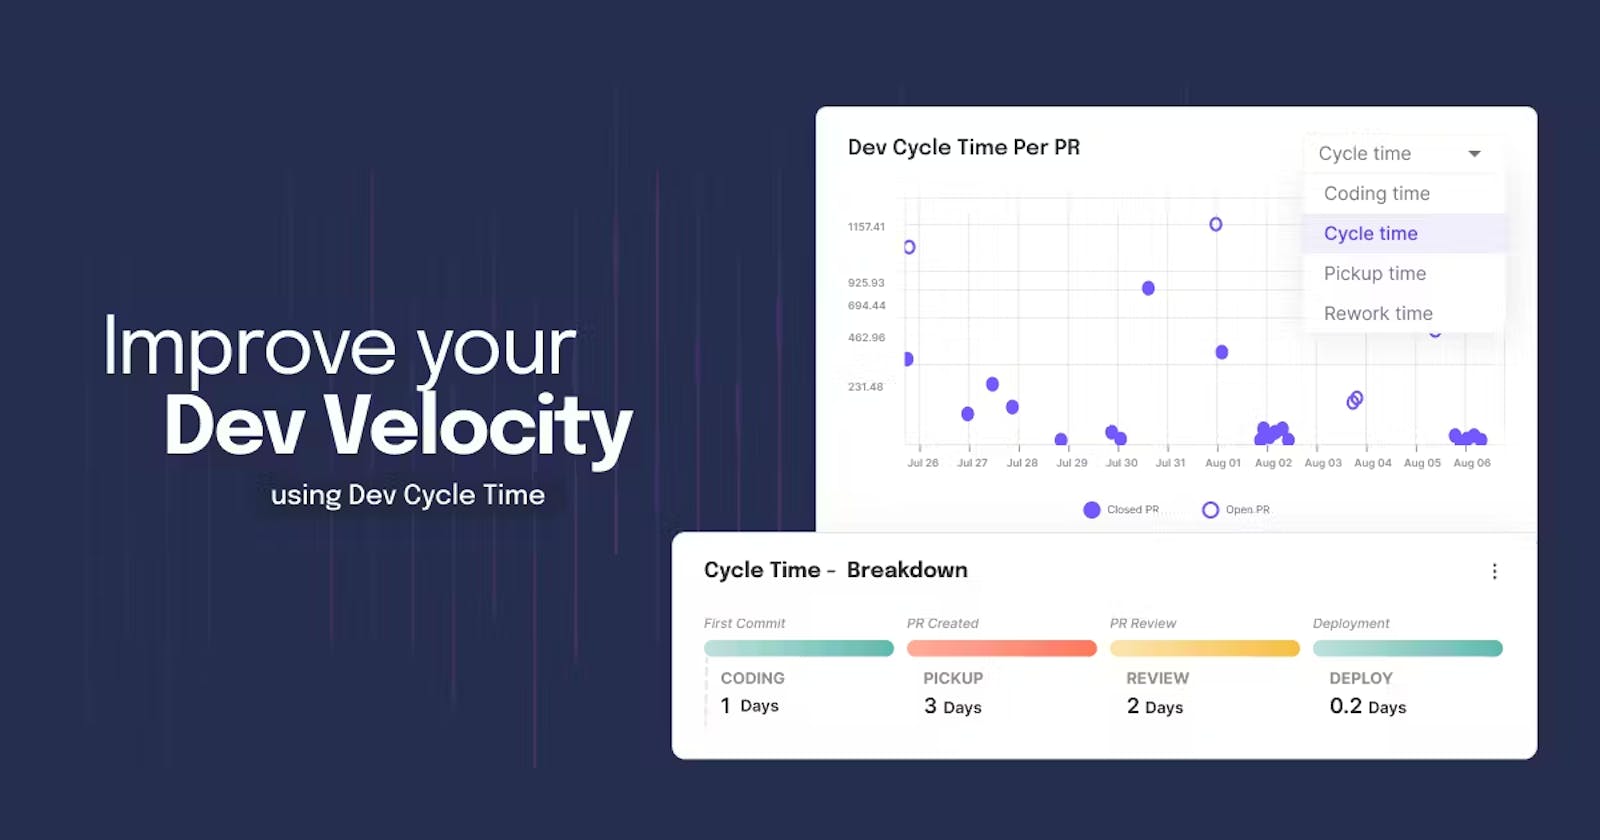 How to Use Cycle Time Metrics to Improve Dev Velocity?